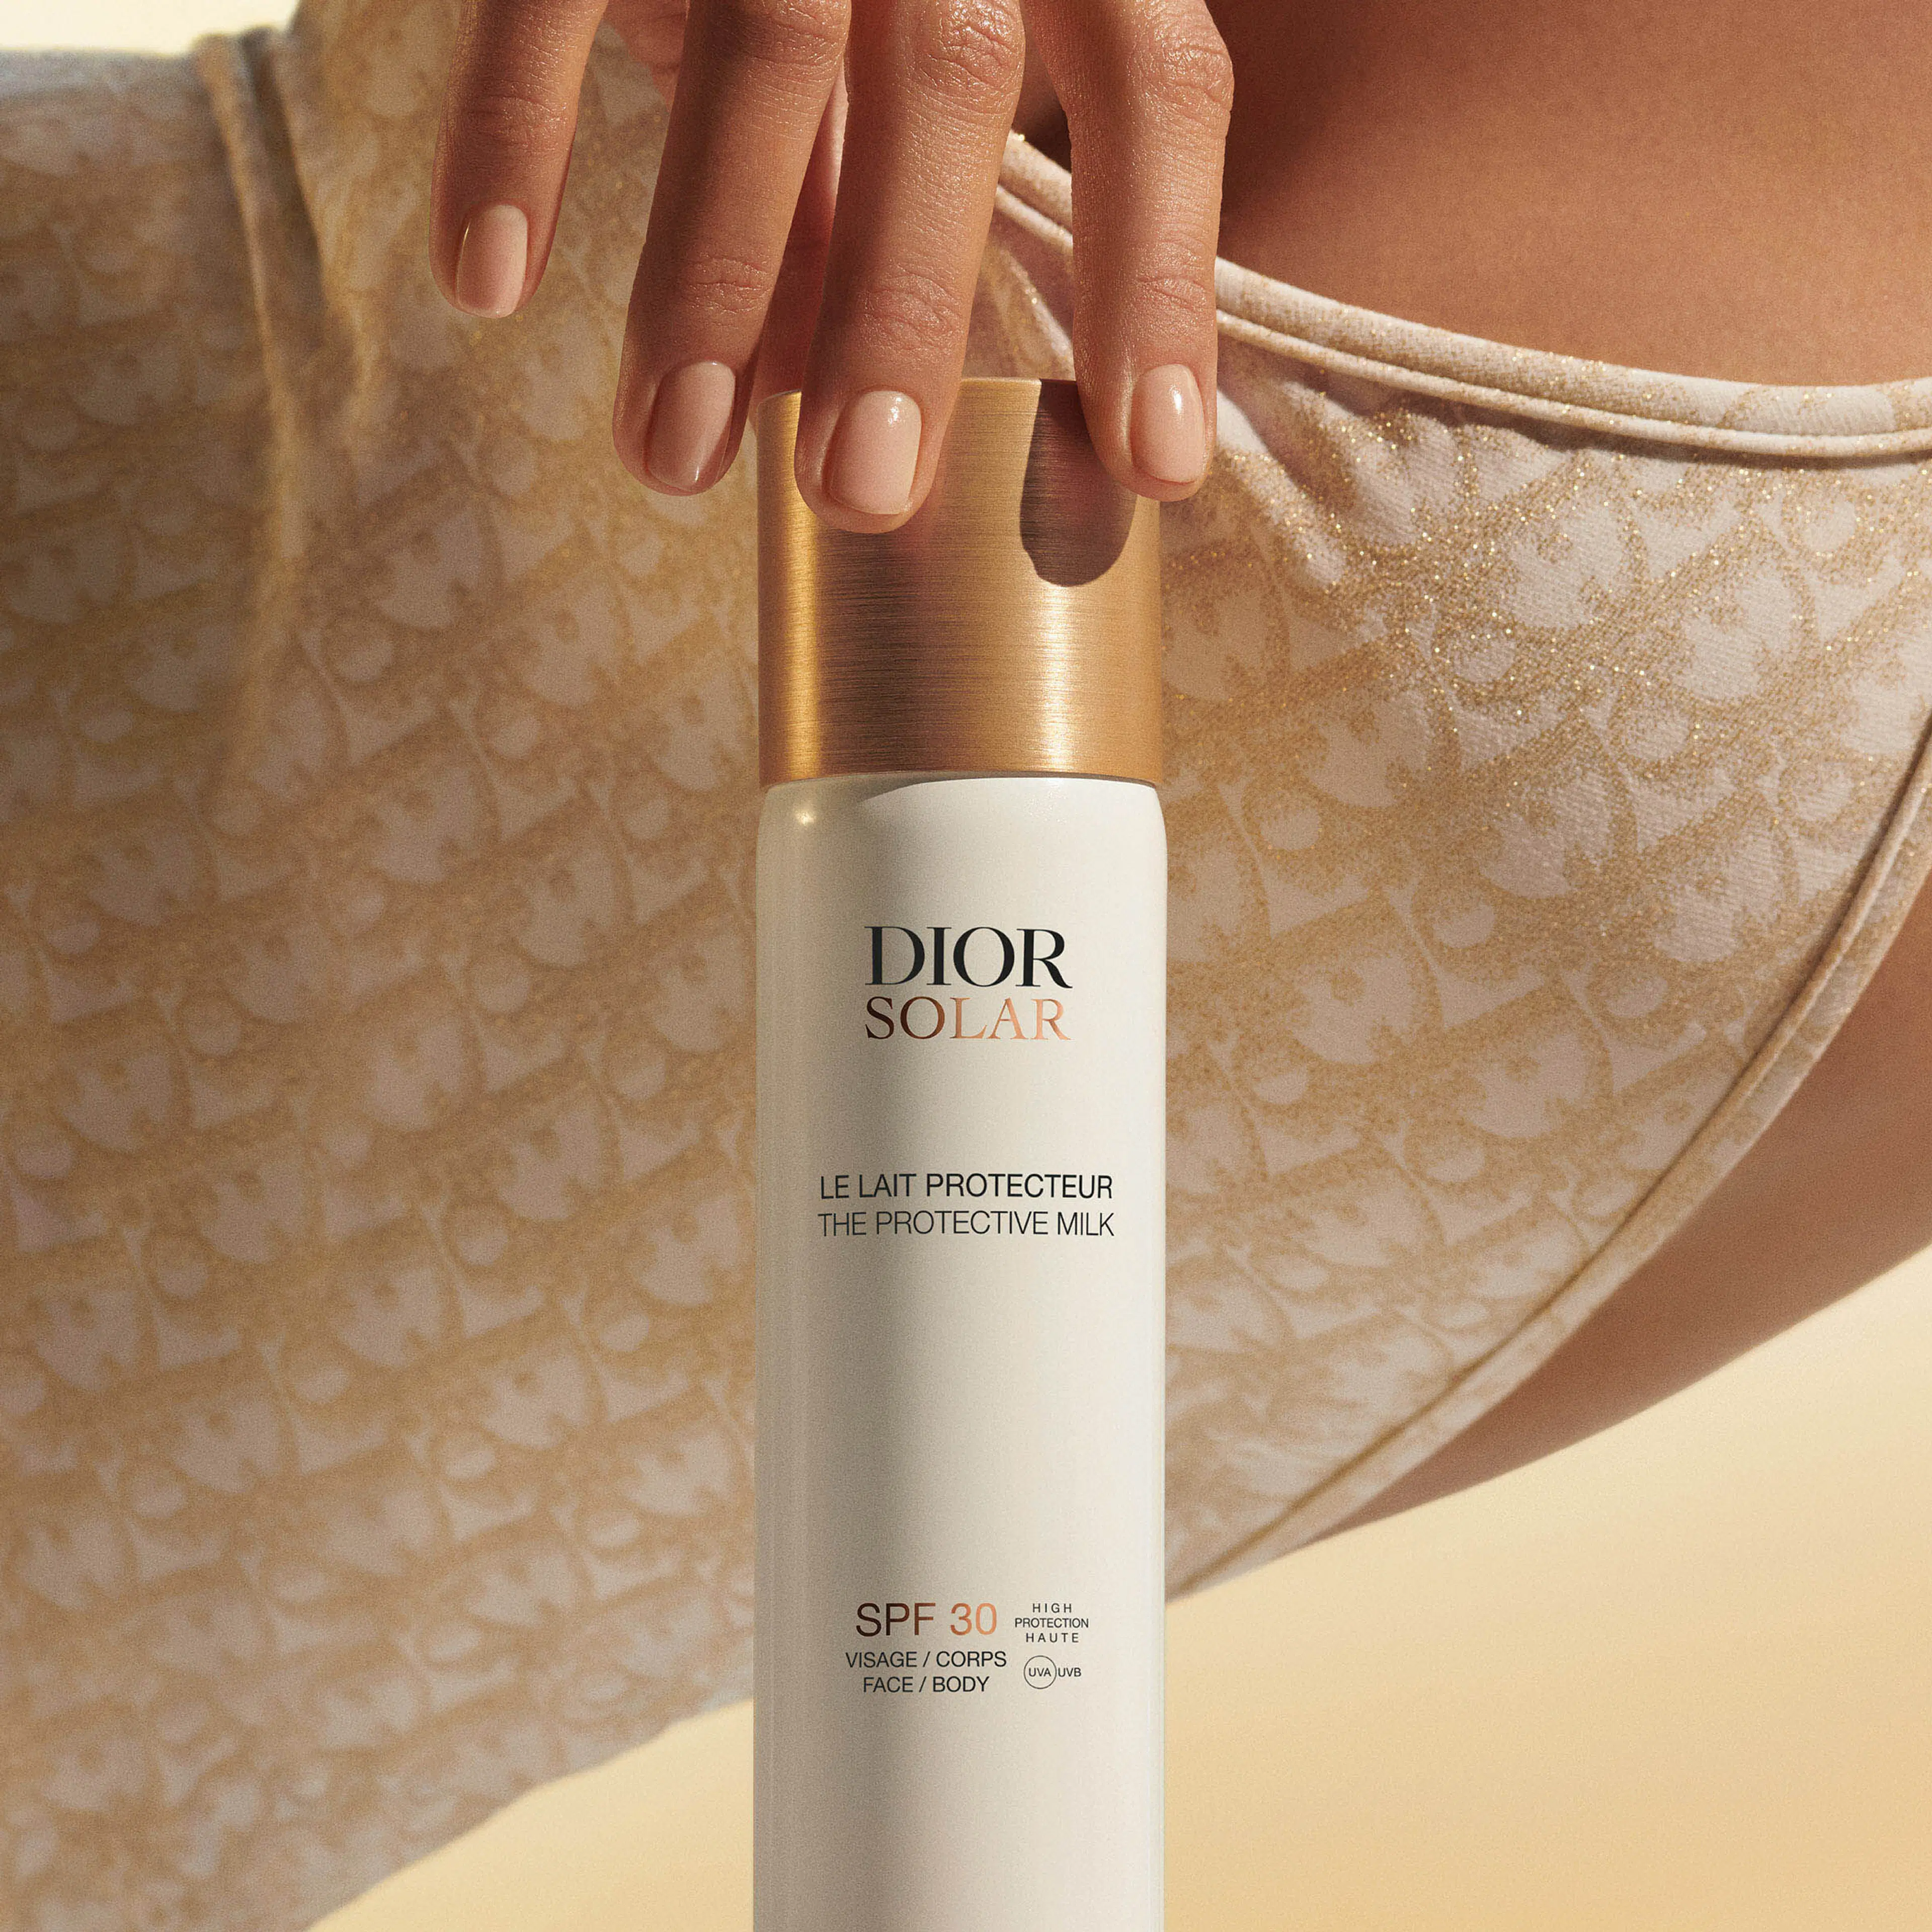 DIOR Solar The Protective Milk for Face and Body SPF 30 aurinkovoide 125 ml